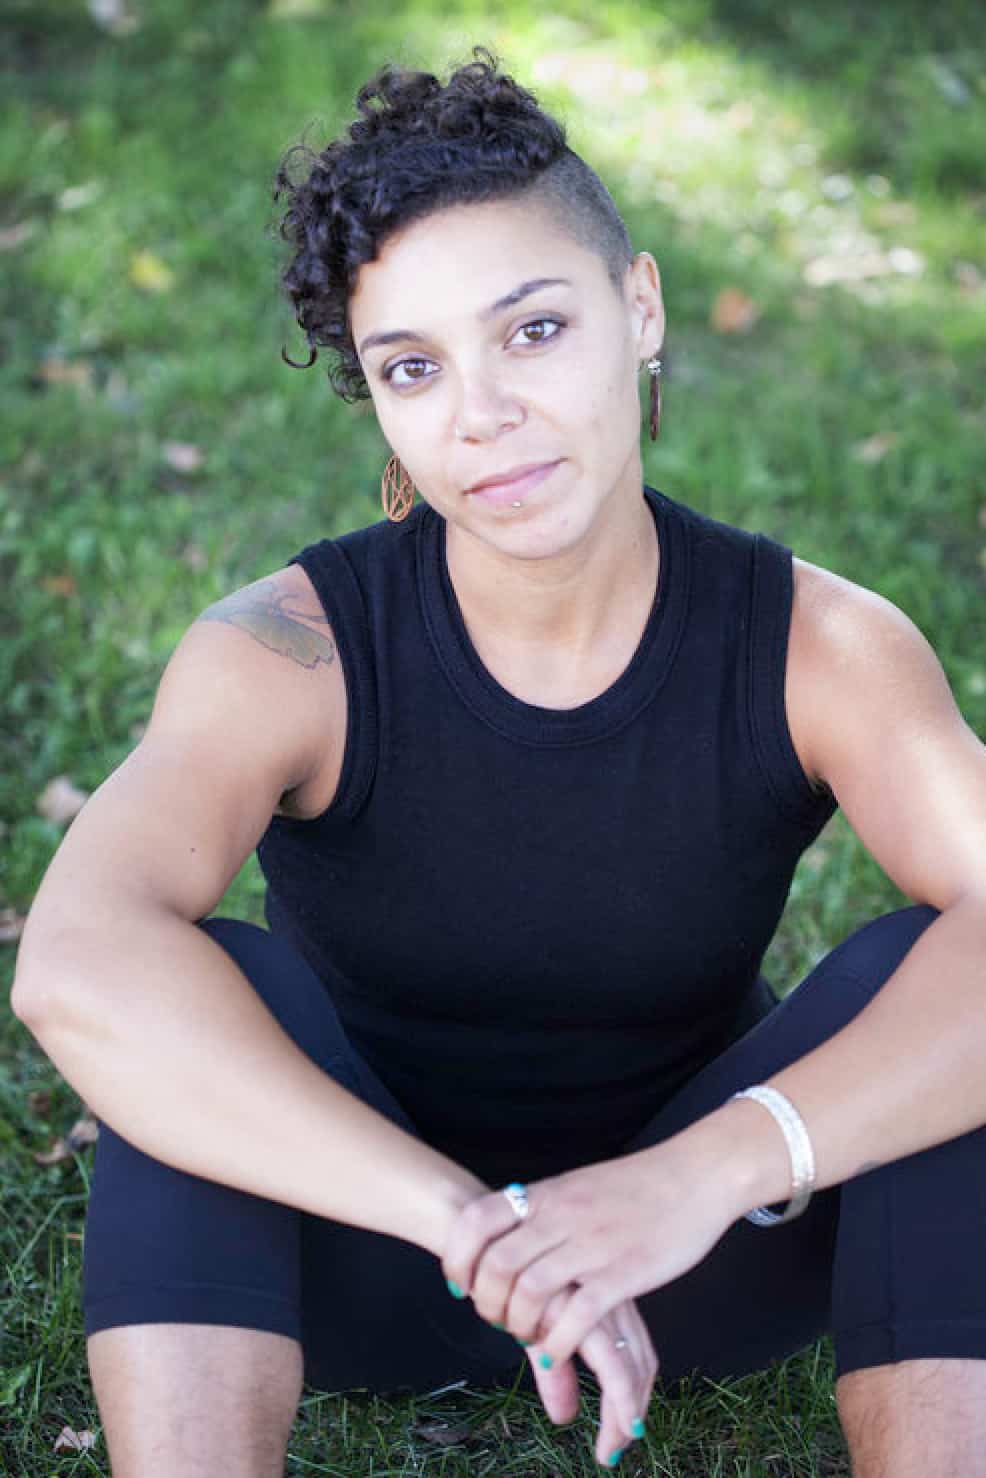 Rage Hezekiah – whose newest collection, Yearn, is a 2021 Diode Editions Book Contest winner, as well as a Lambda Literary Award finalist, a Vermont Book Award finalist, and an Audre Lorde Award for Lesbian Poetry finalist — will read with Voices of Poetry in Stockbridge.